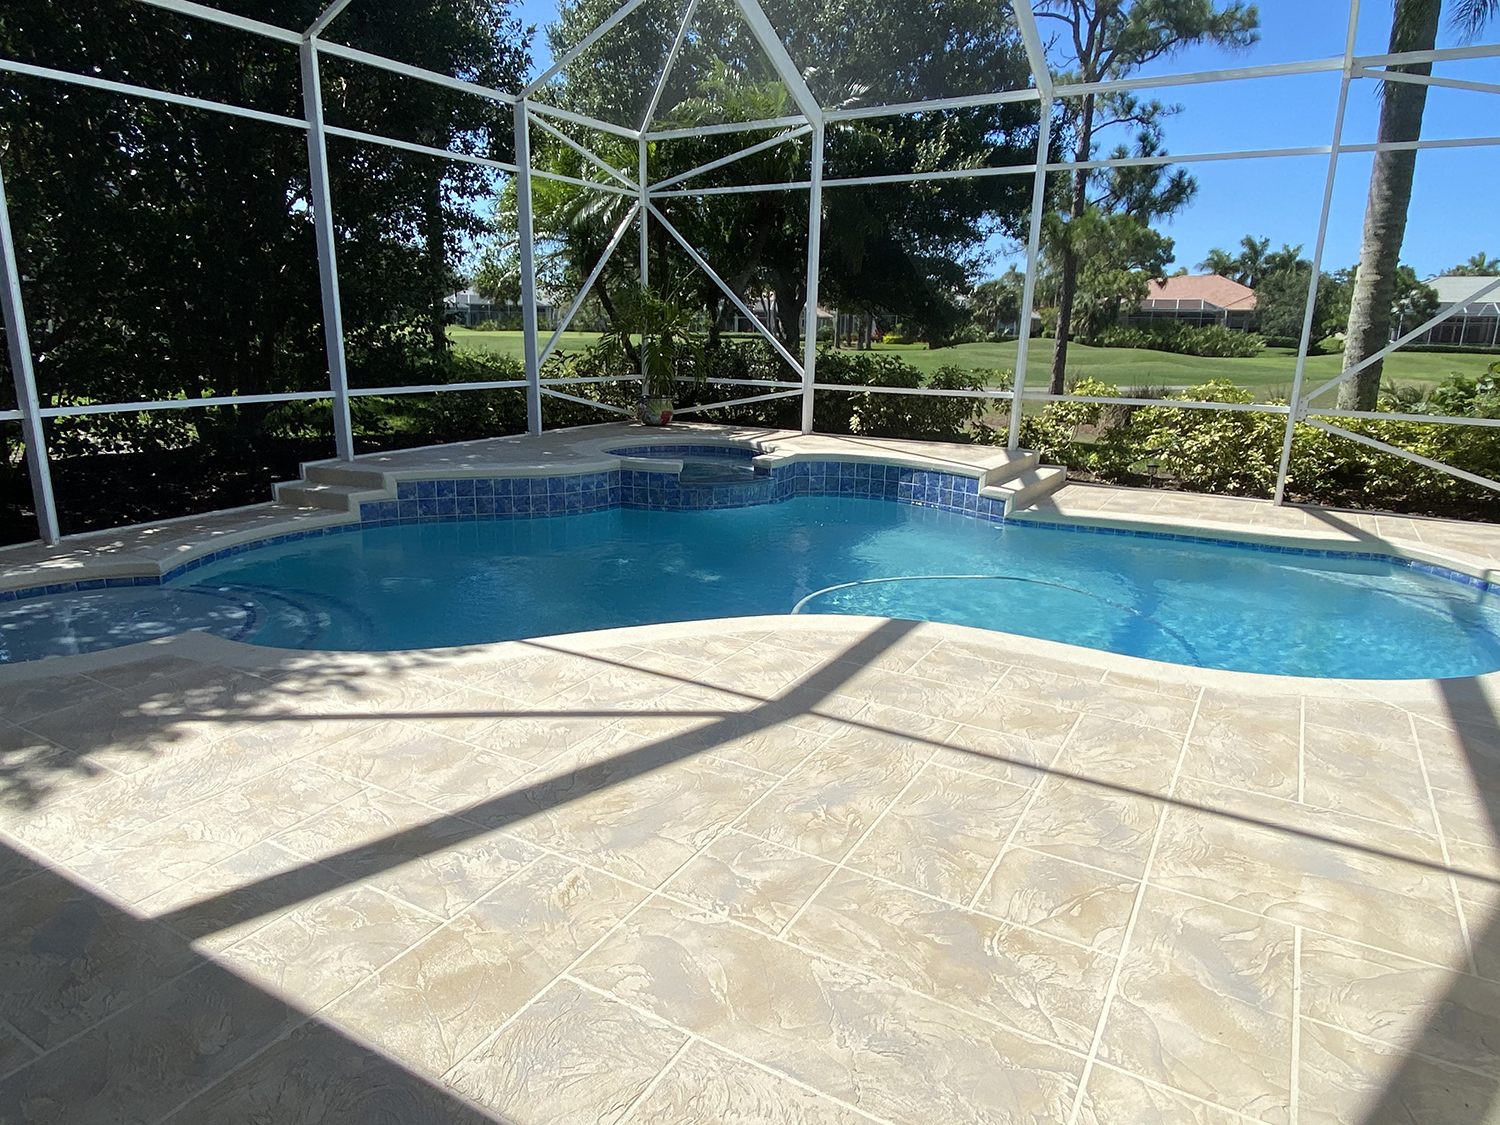 Residential Swimming Pool Resurfacing and Refinishing in South Florida